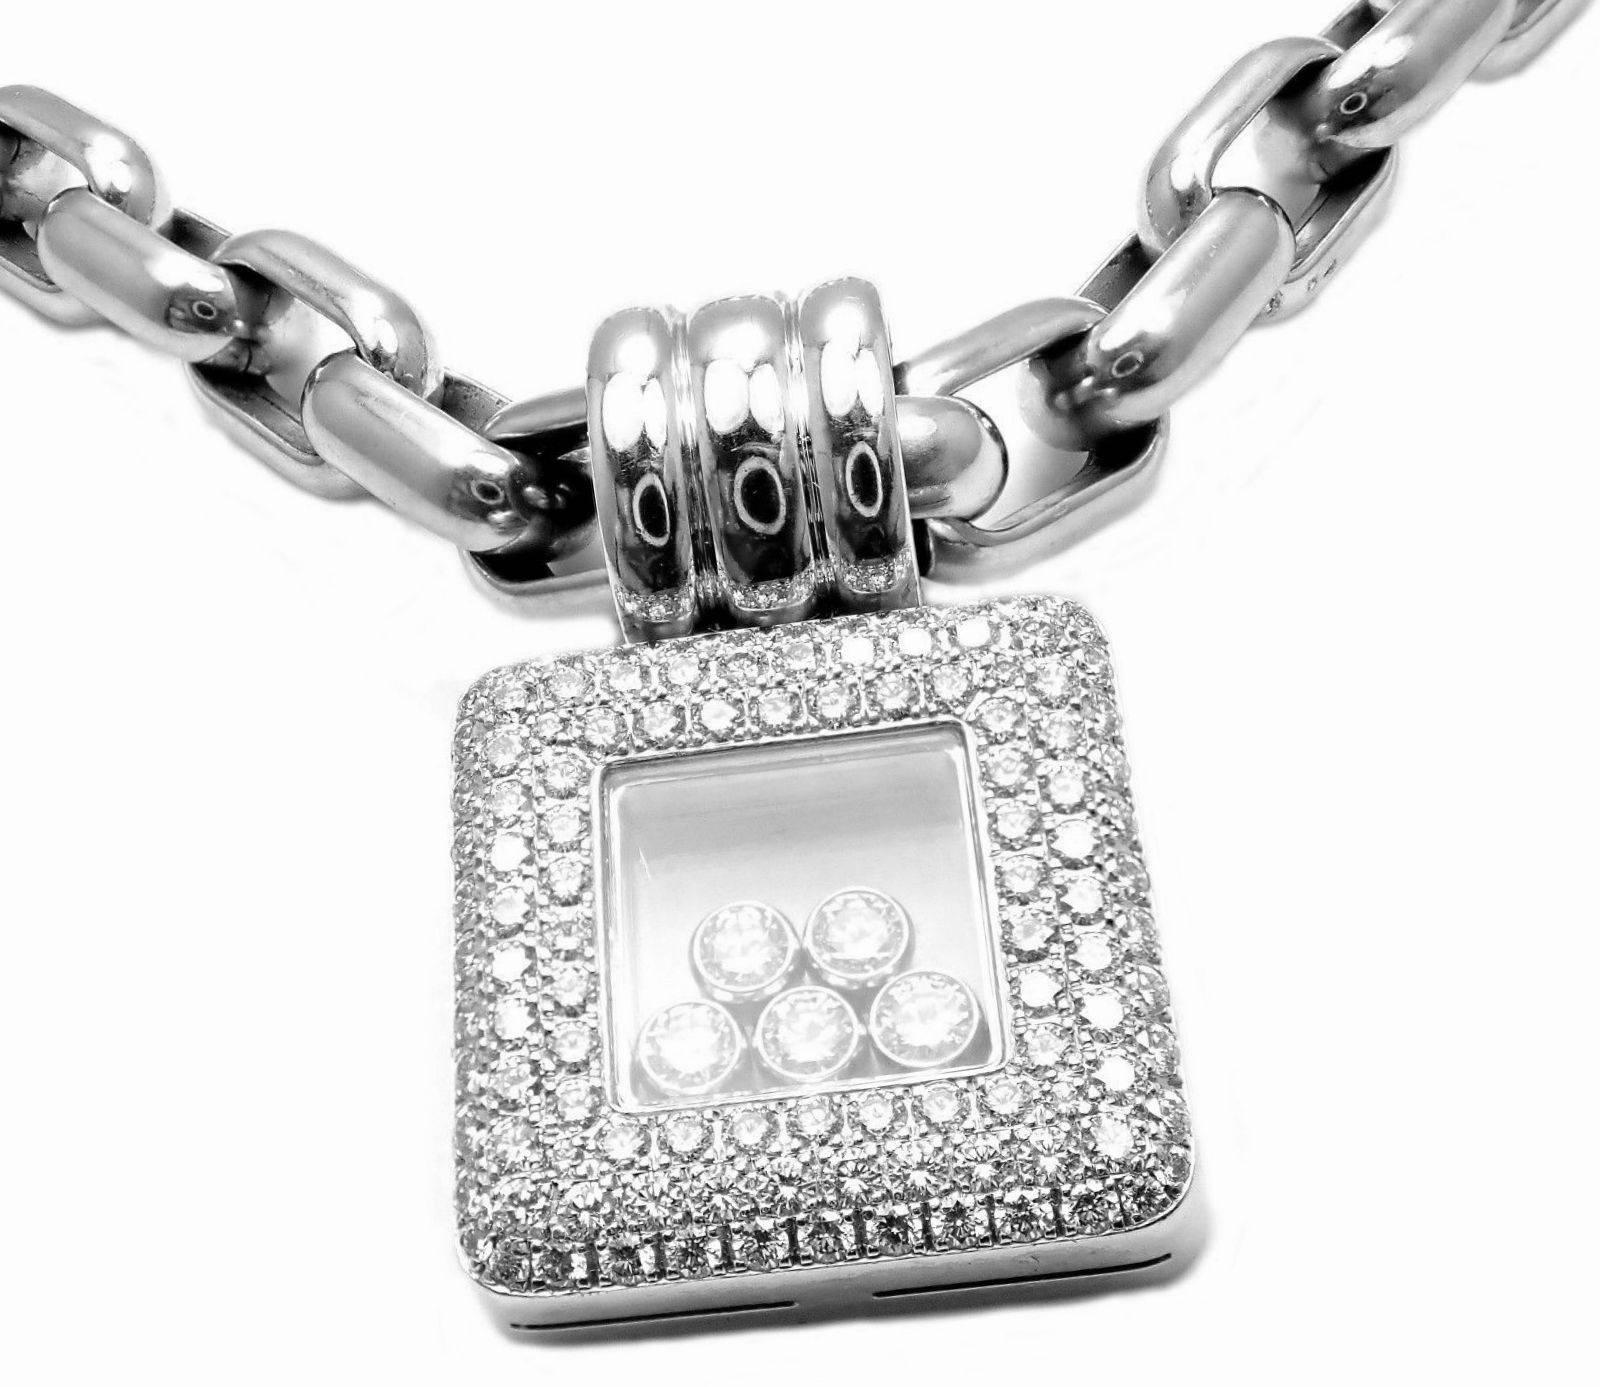 18k White Gold Happy Diamonds Diamond Square Necklace by Chopard. 
With 122 Round Brilliant Cut Diamonds VS1 plus 5 round brilliant cut diamonds floating in the pendant total weight approx. 3.00ctw
Details:
Length: 18